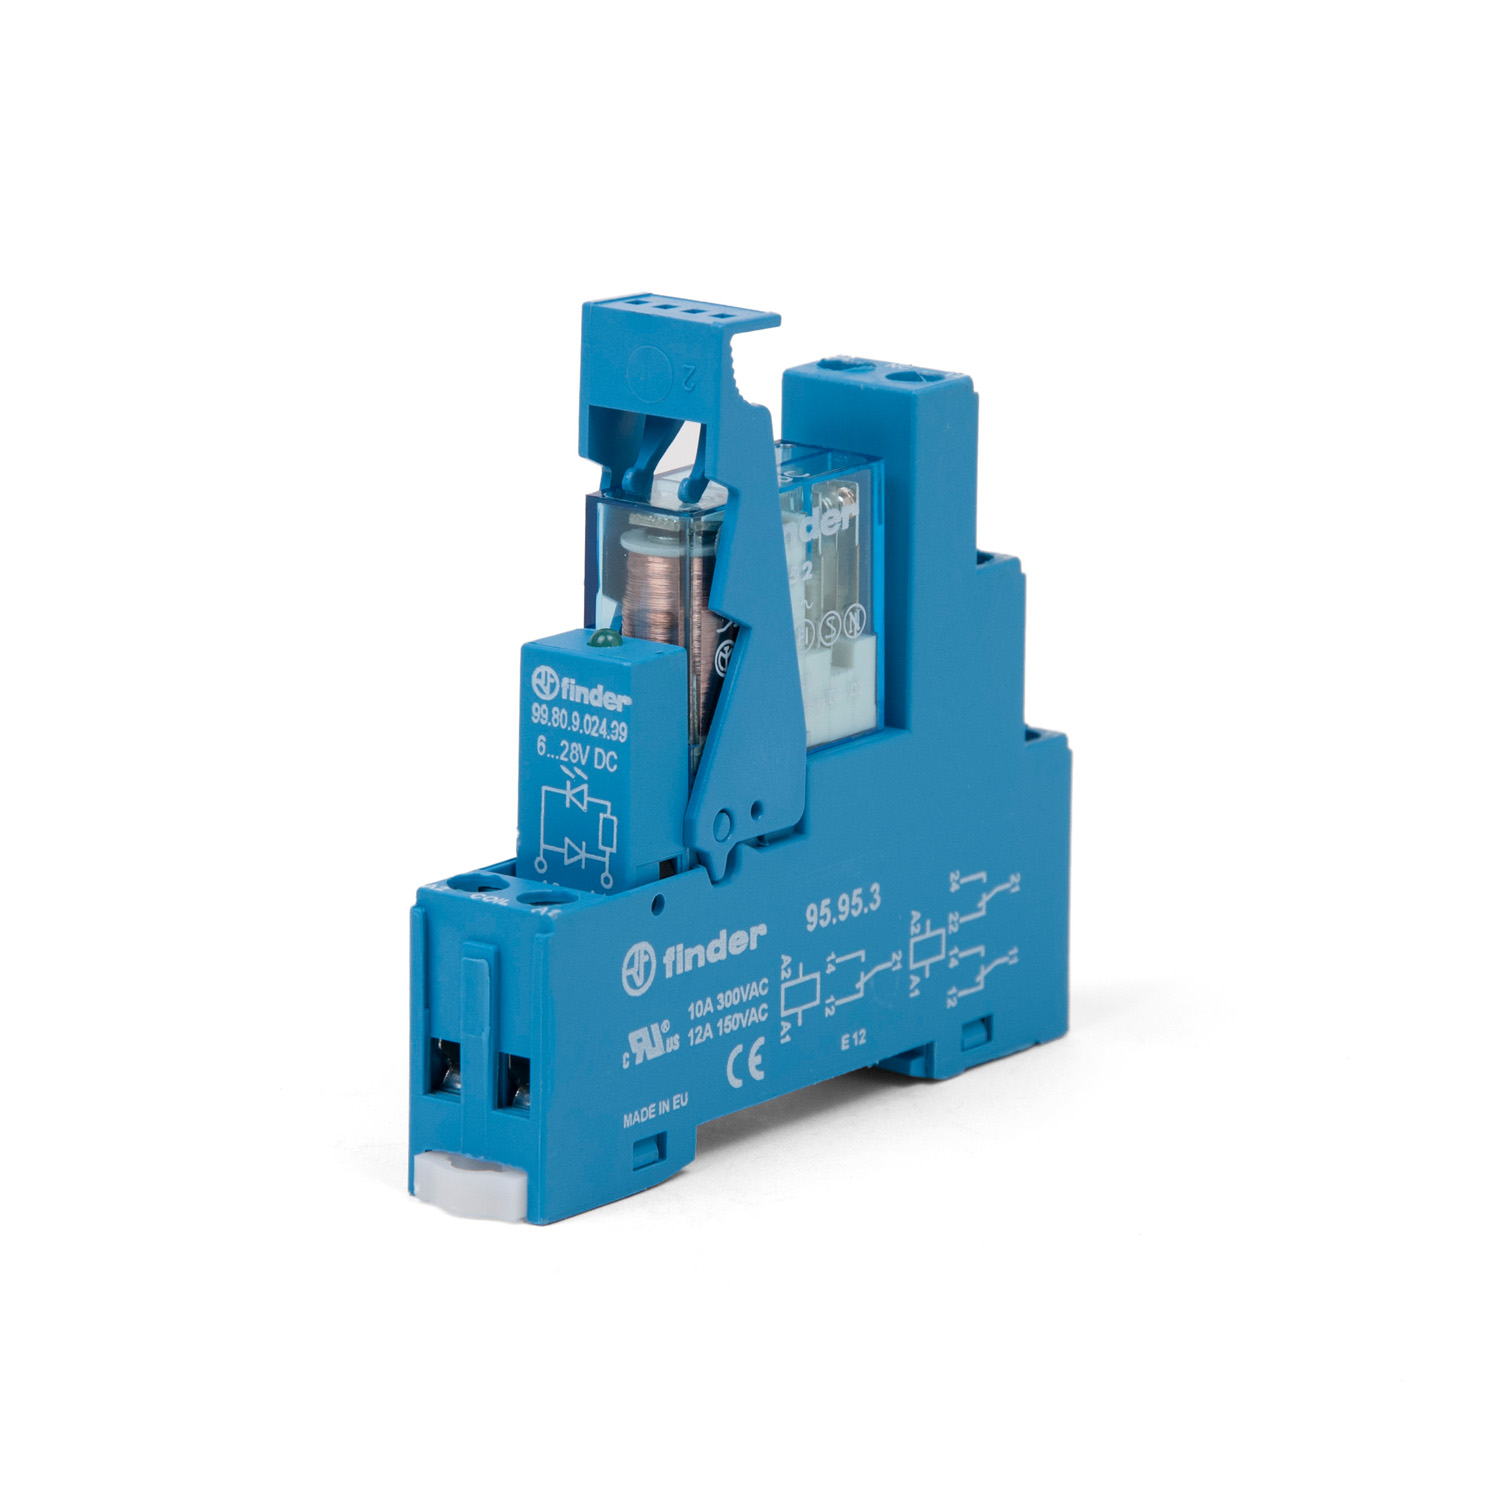 EFN-151 Coupling Relay with socket, type 40.52 8A 250V